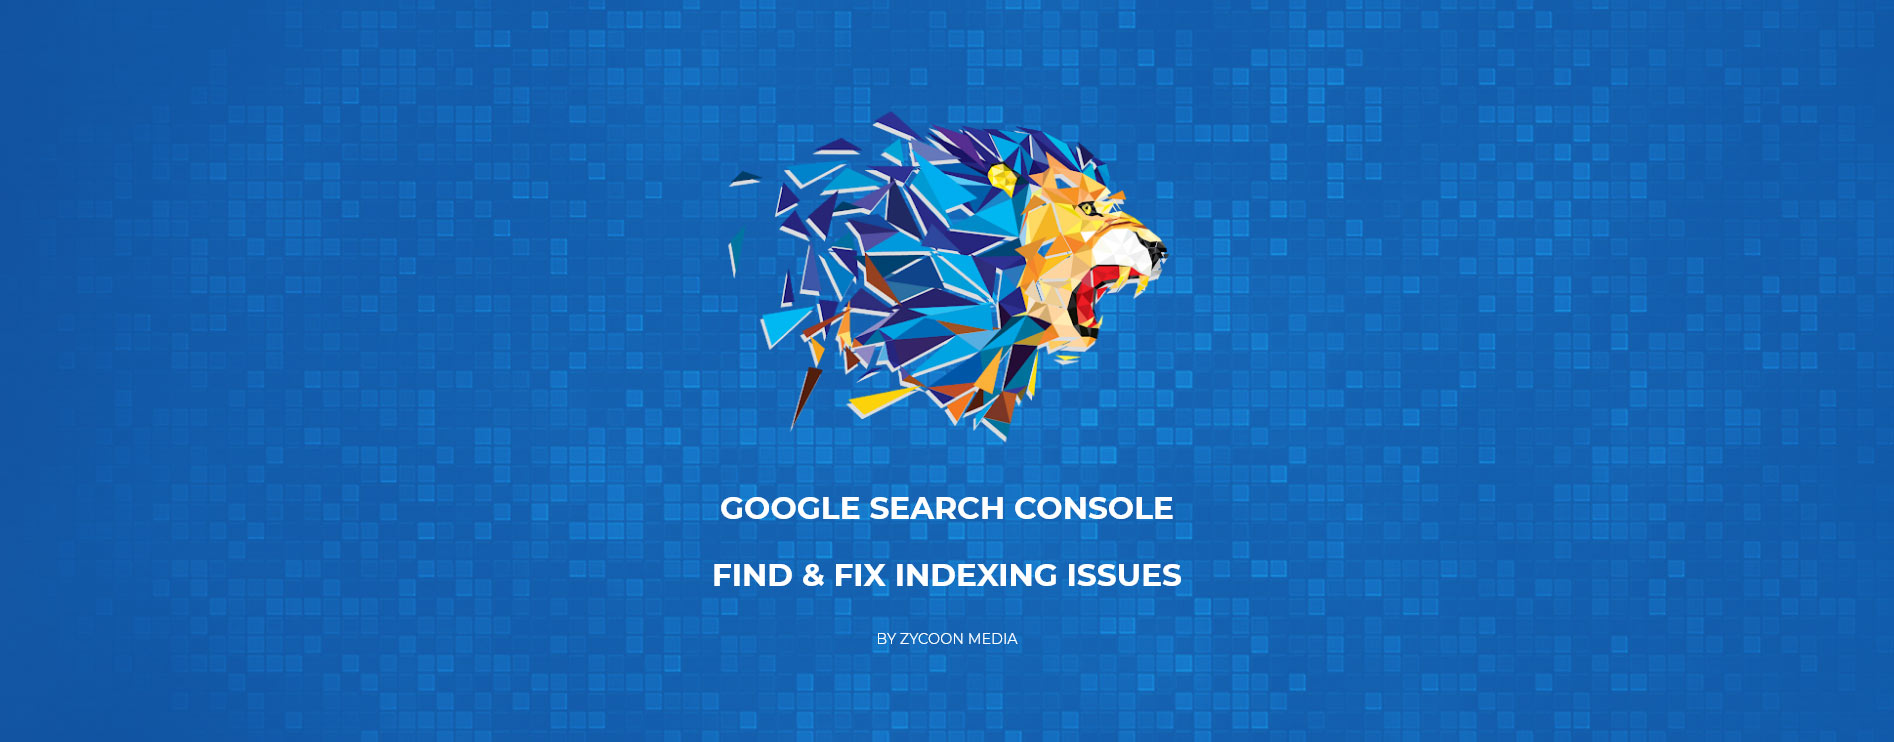 Google Search Console Indexing Issues